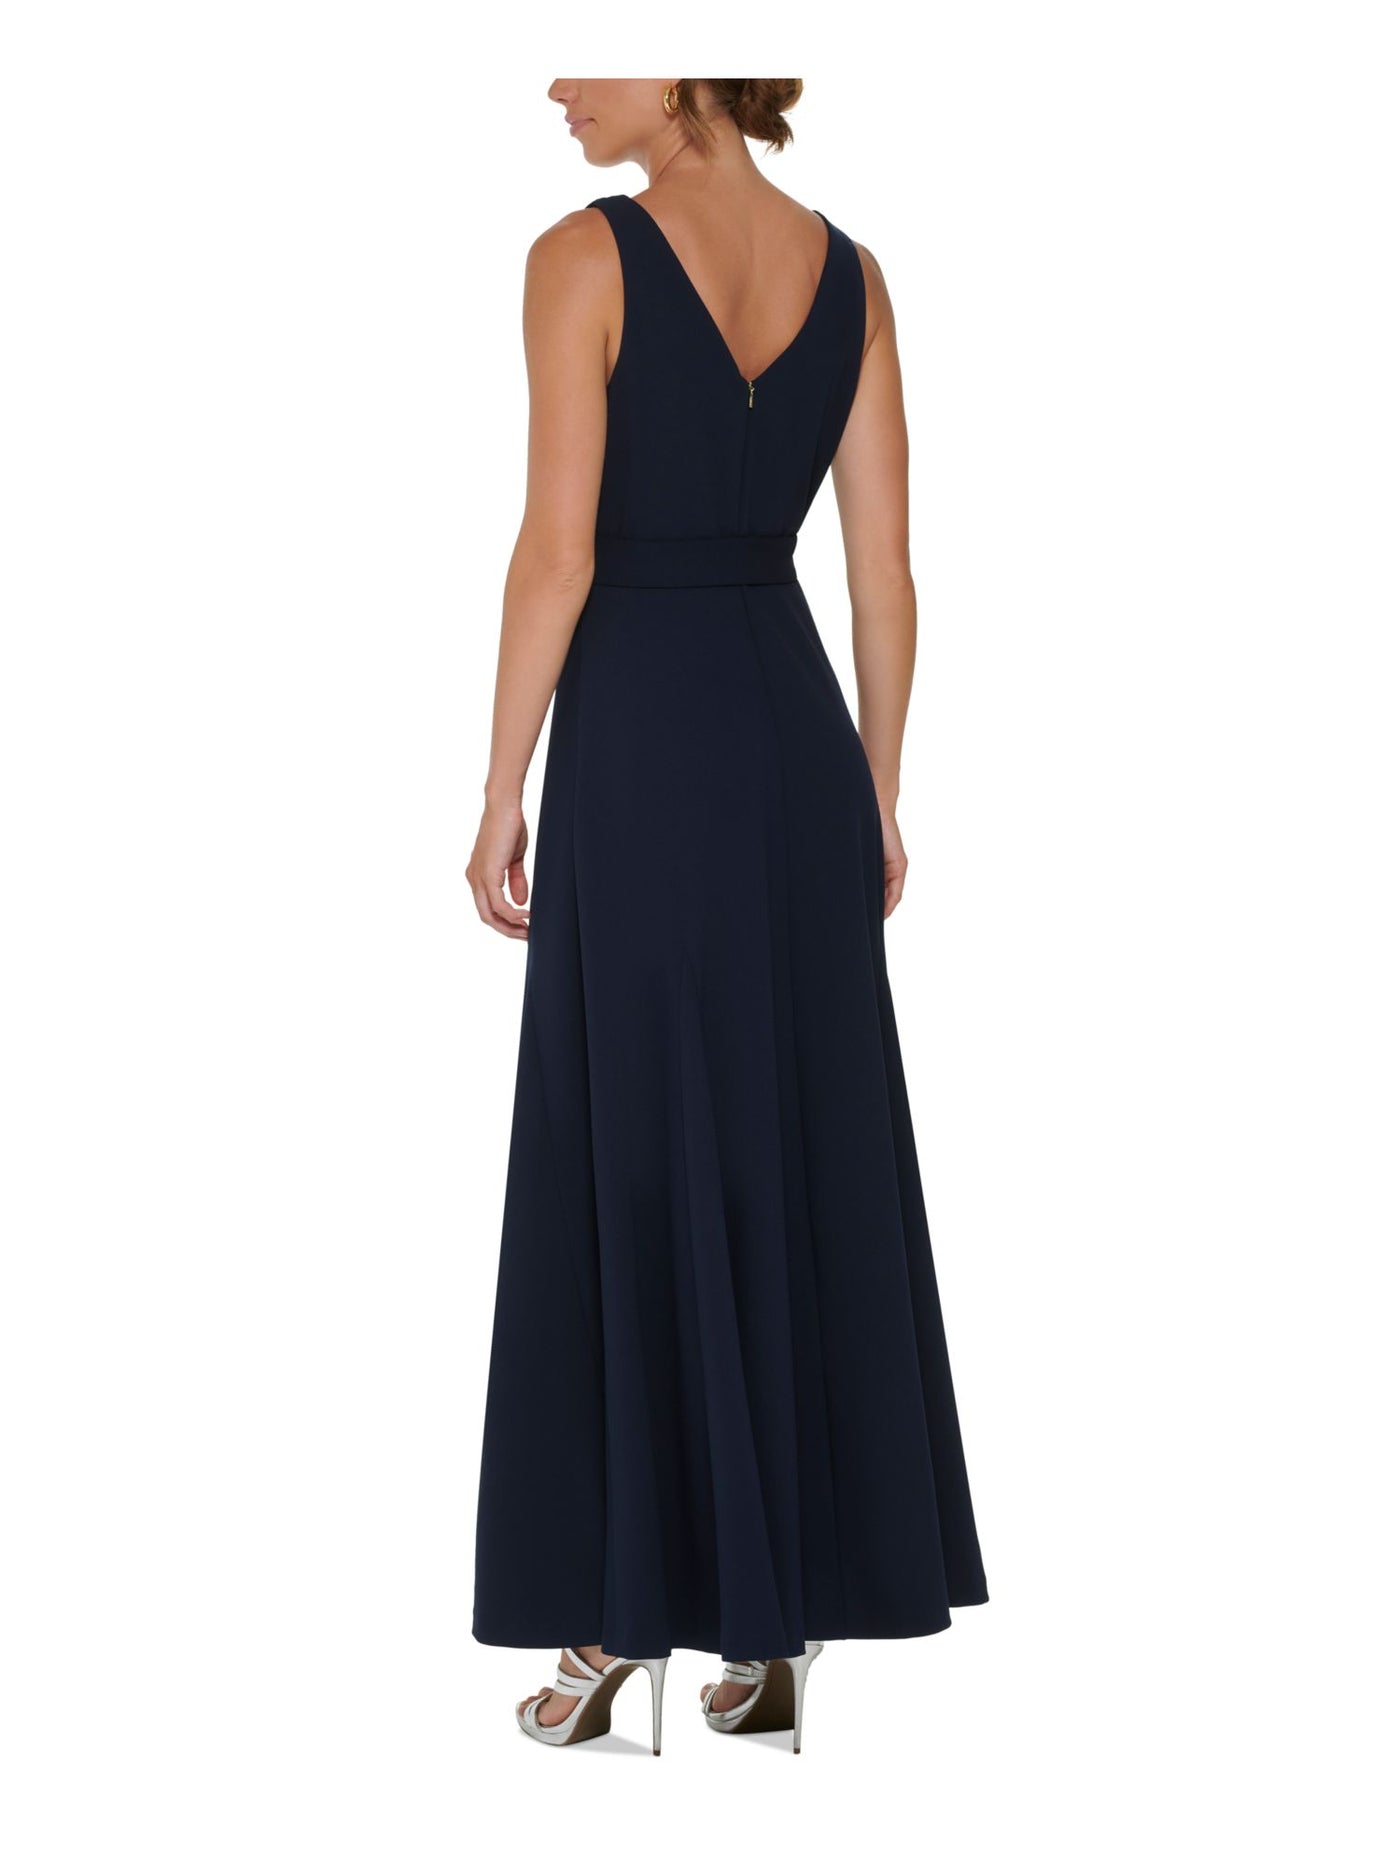 DKNY Womens Navy Zippered Belted Pleated Lined Bodice Godets Sleeveless V Neck Full-Length Formal Gown Dress 10